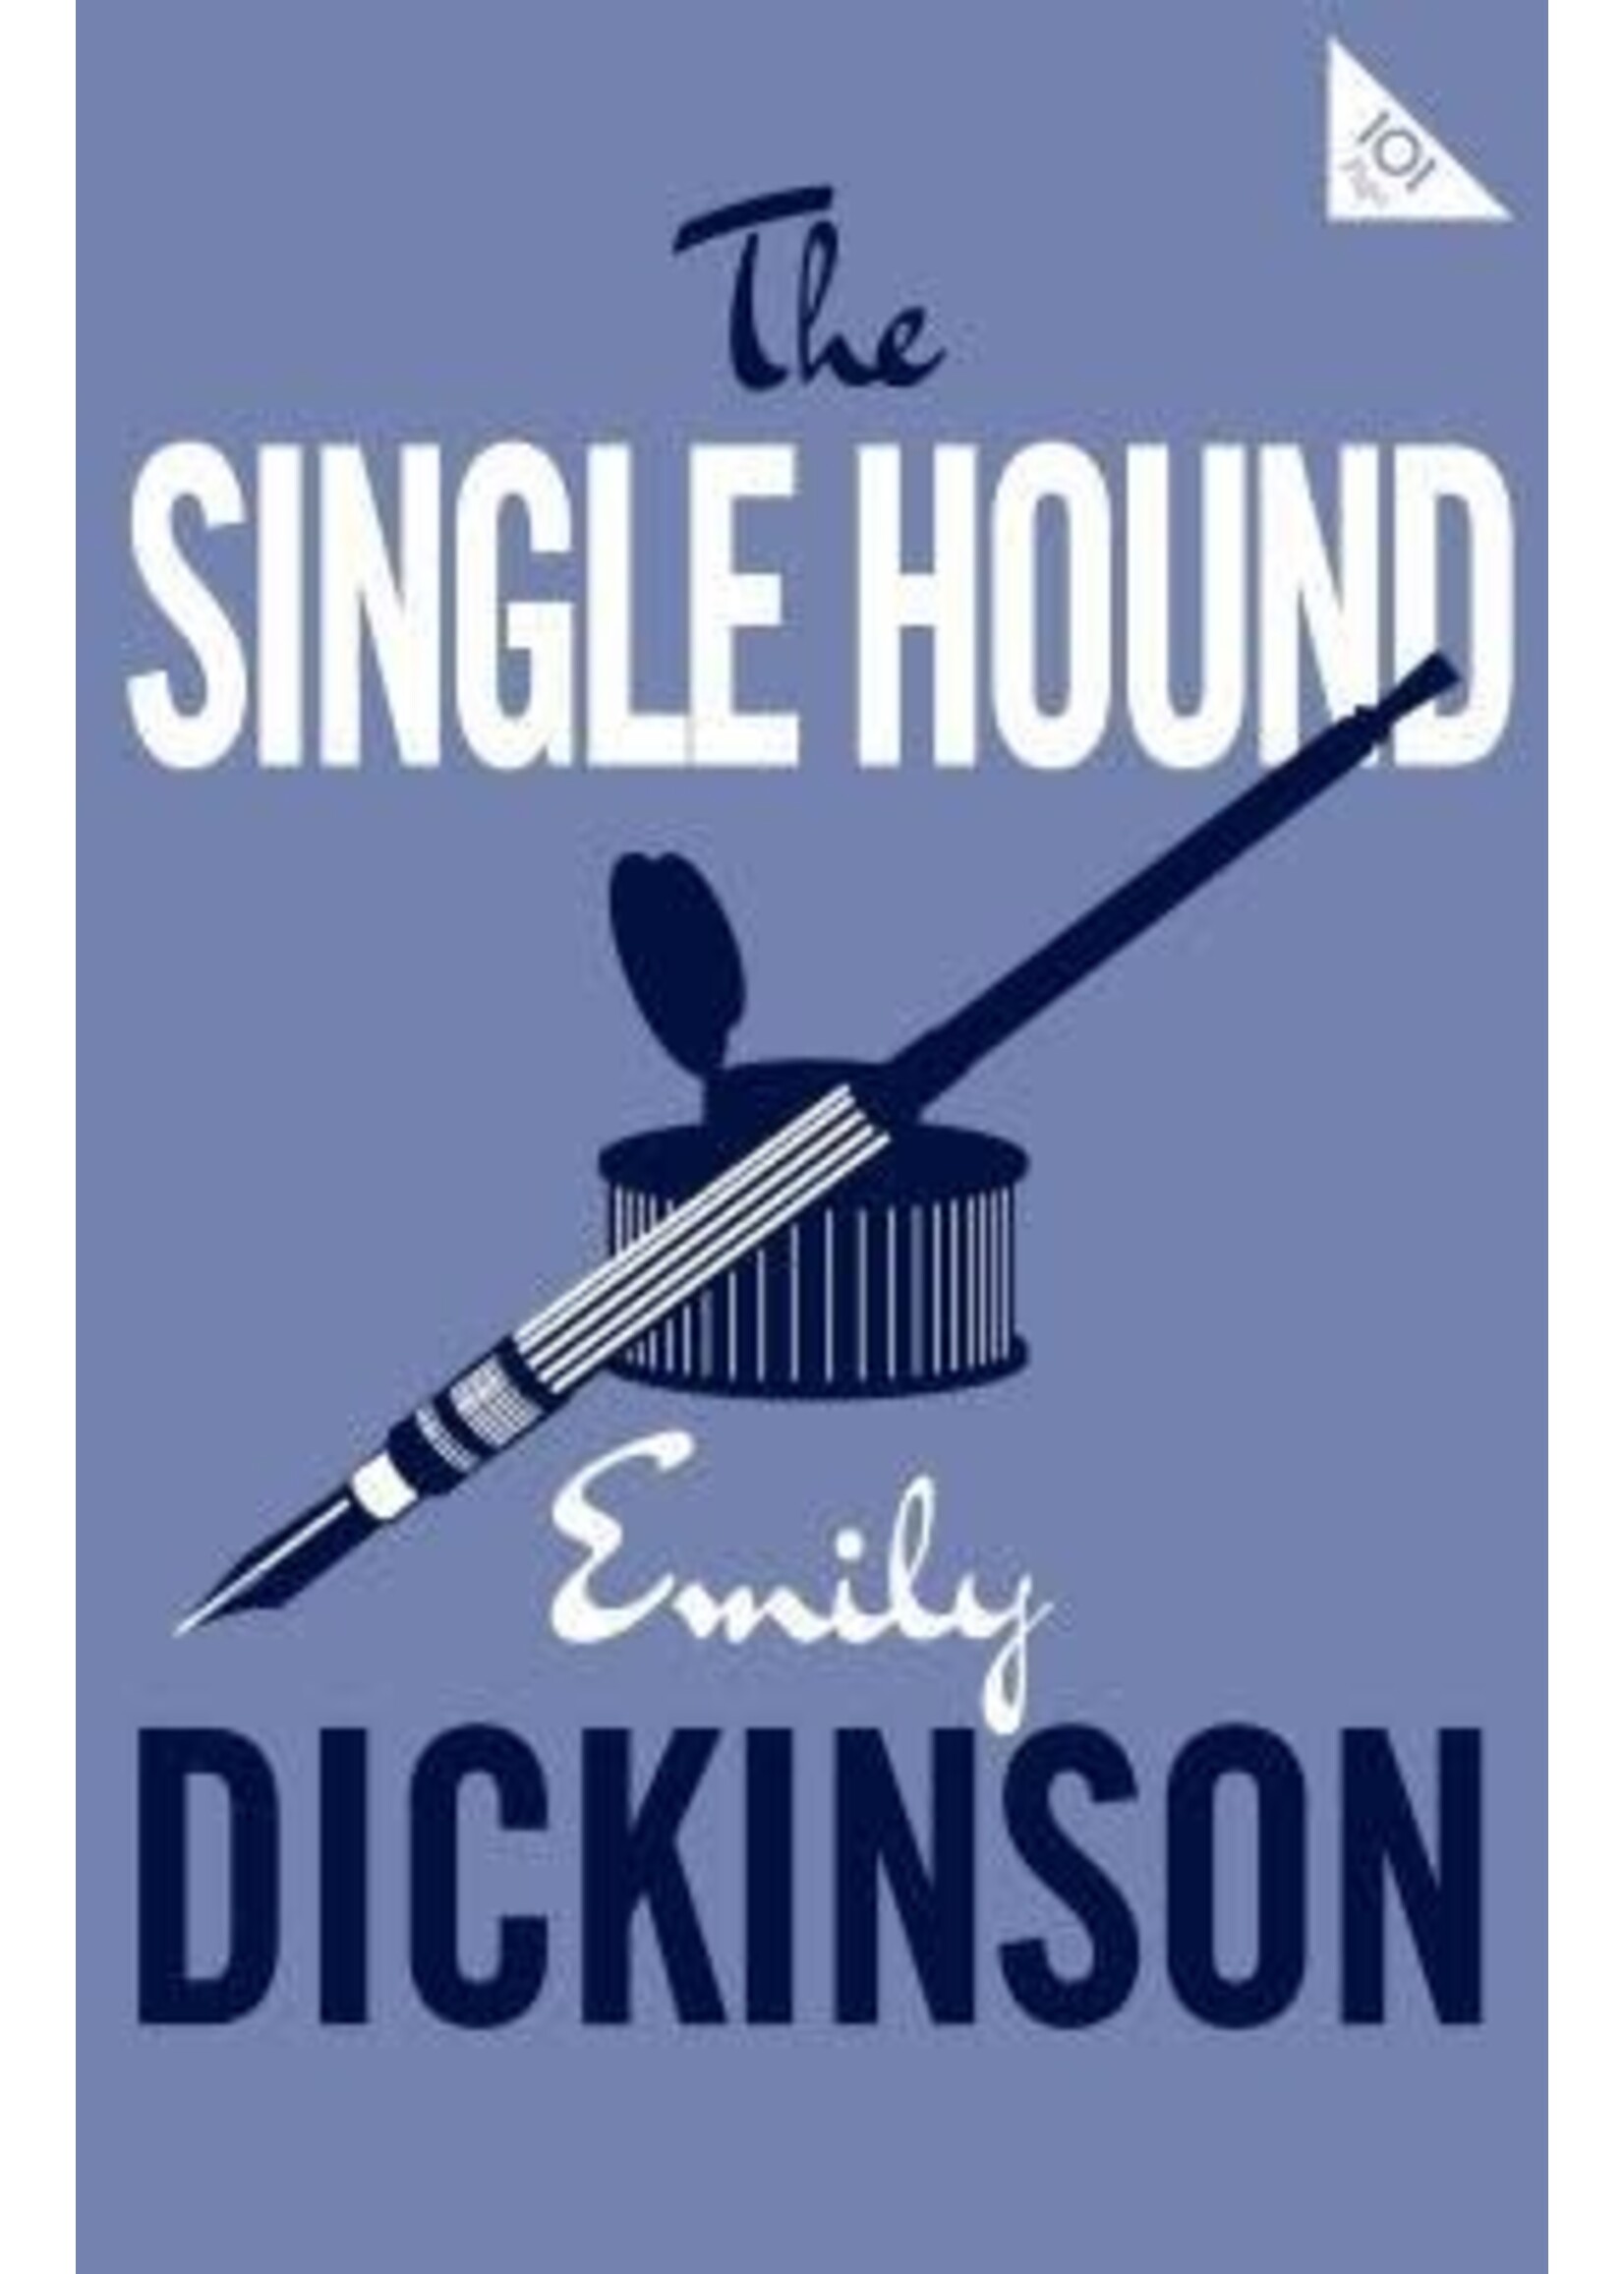 The Single Hound by Emily Dickinson